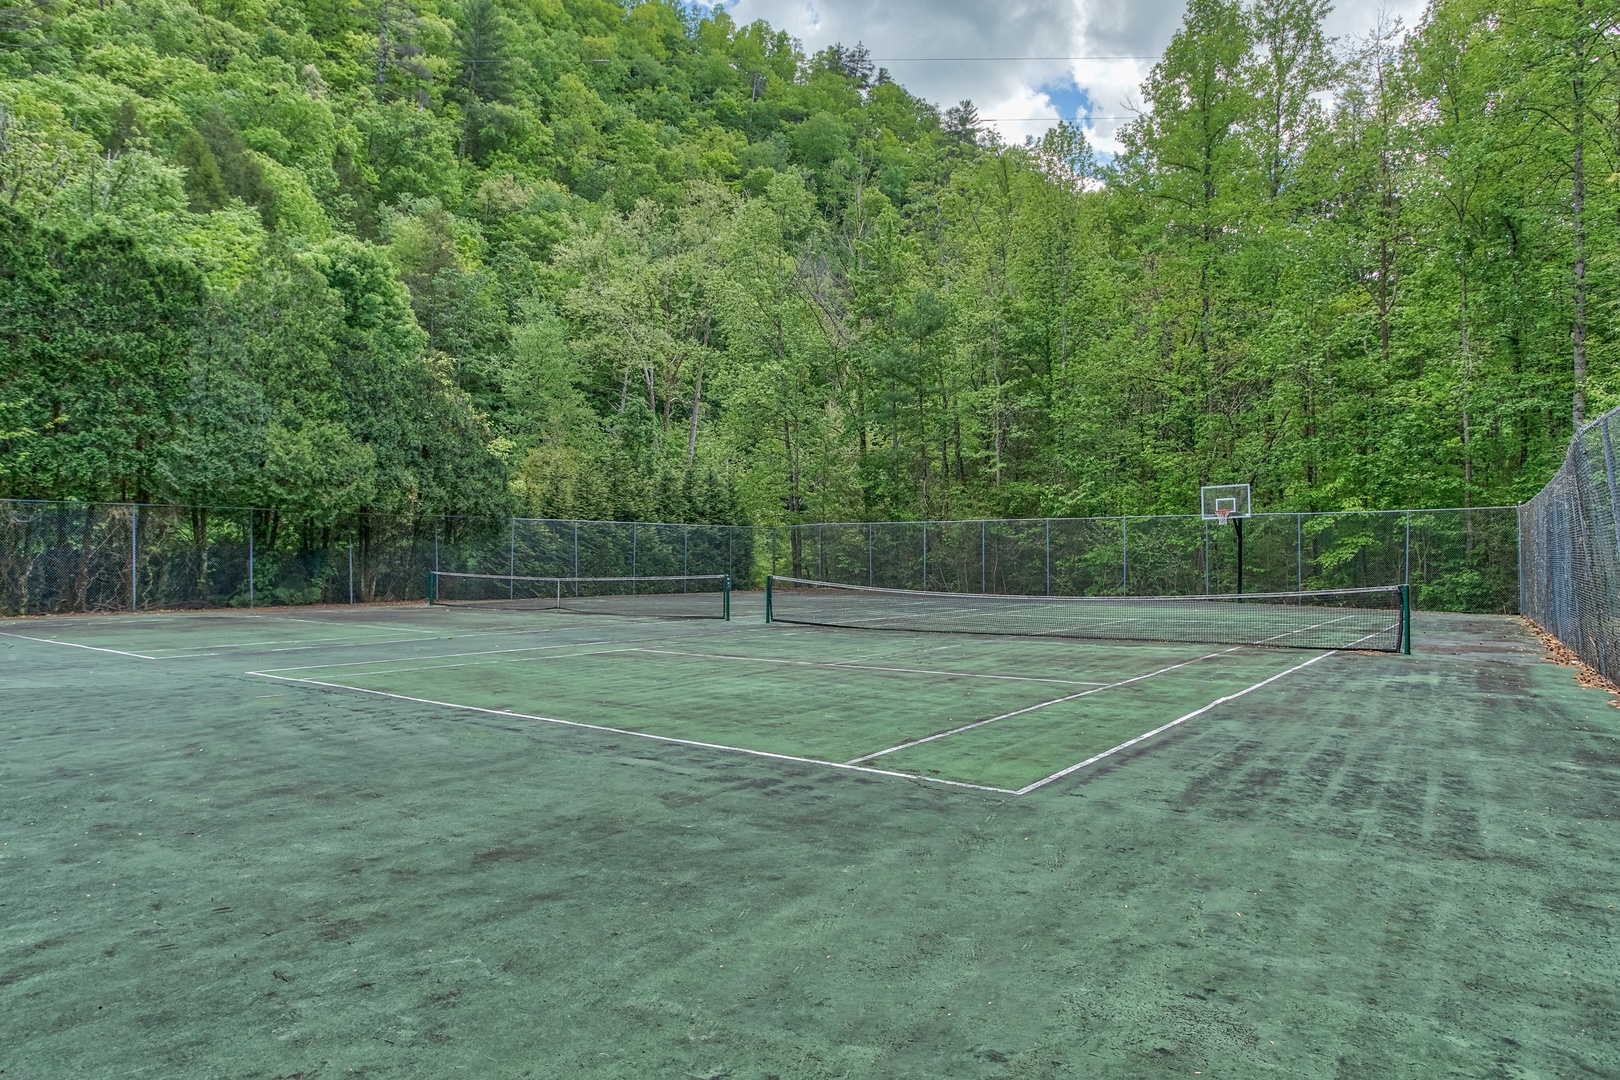 Tennis courts for guests at Black Bears & Biscuits Lodge, a 6 bedroom cabin rental located in Pigeon Forge